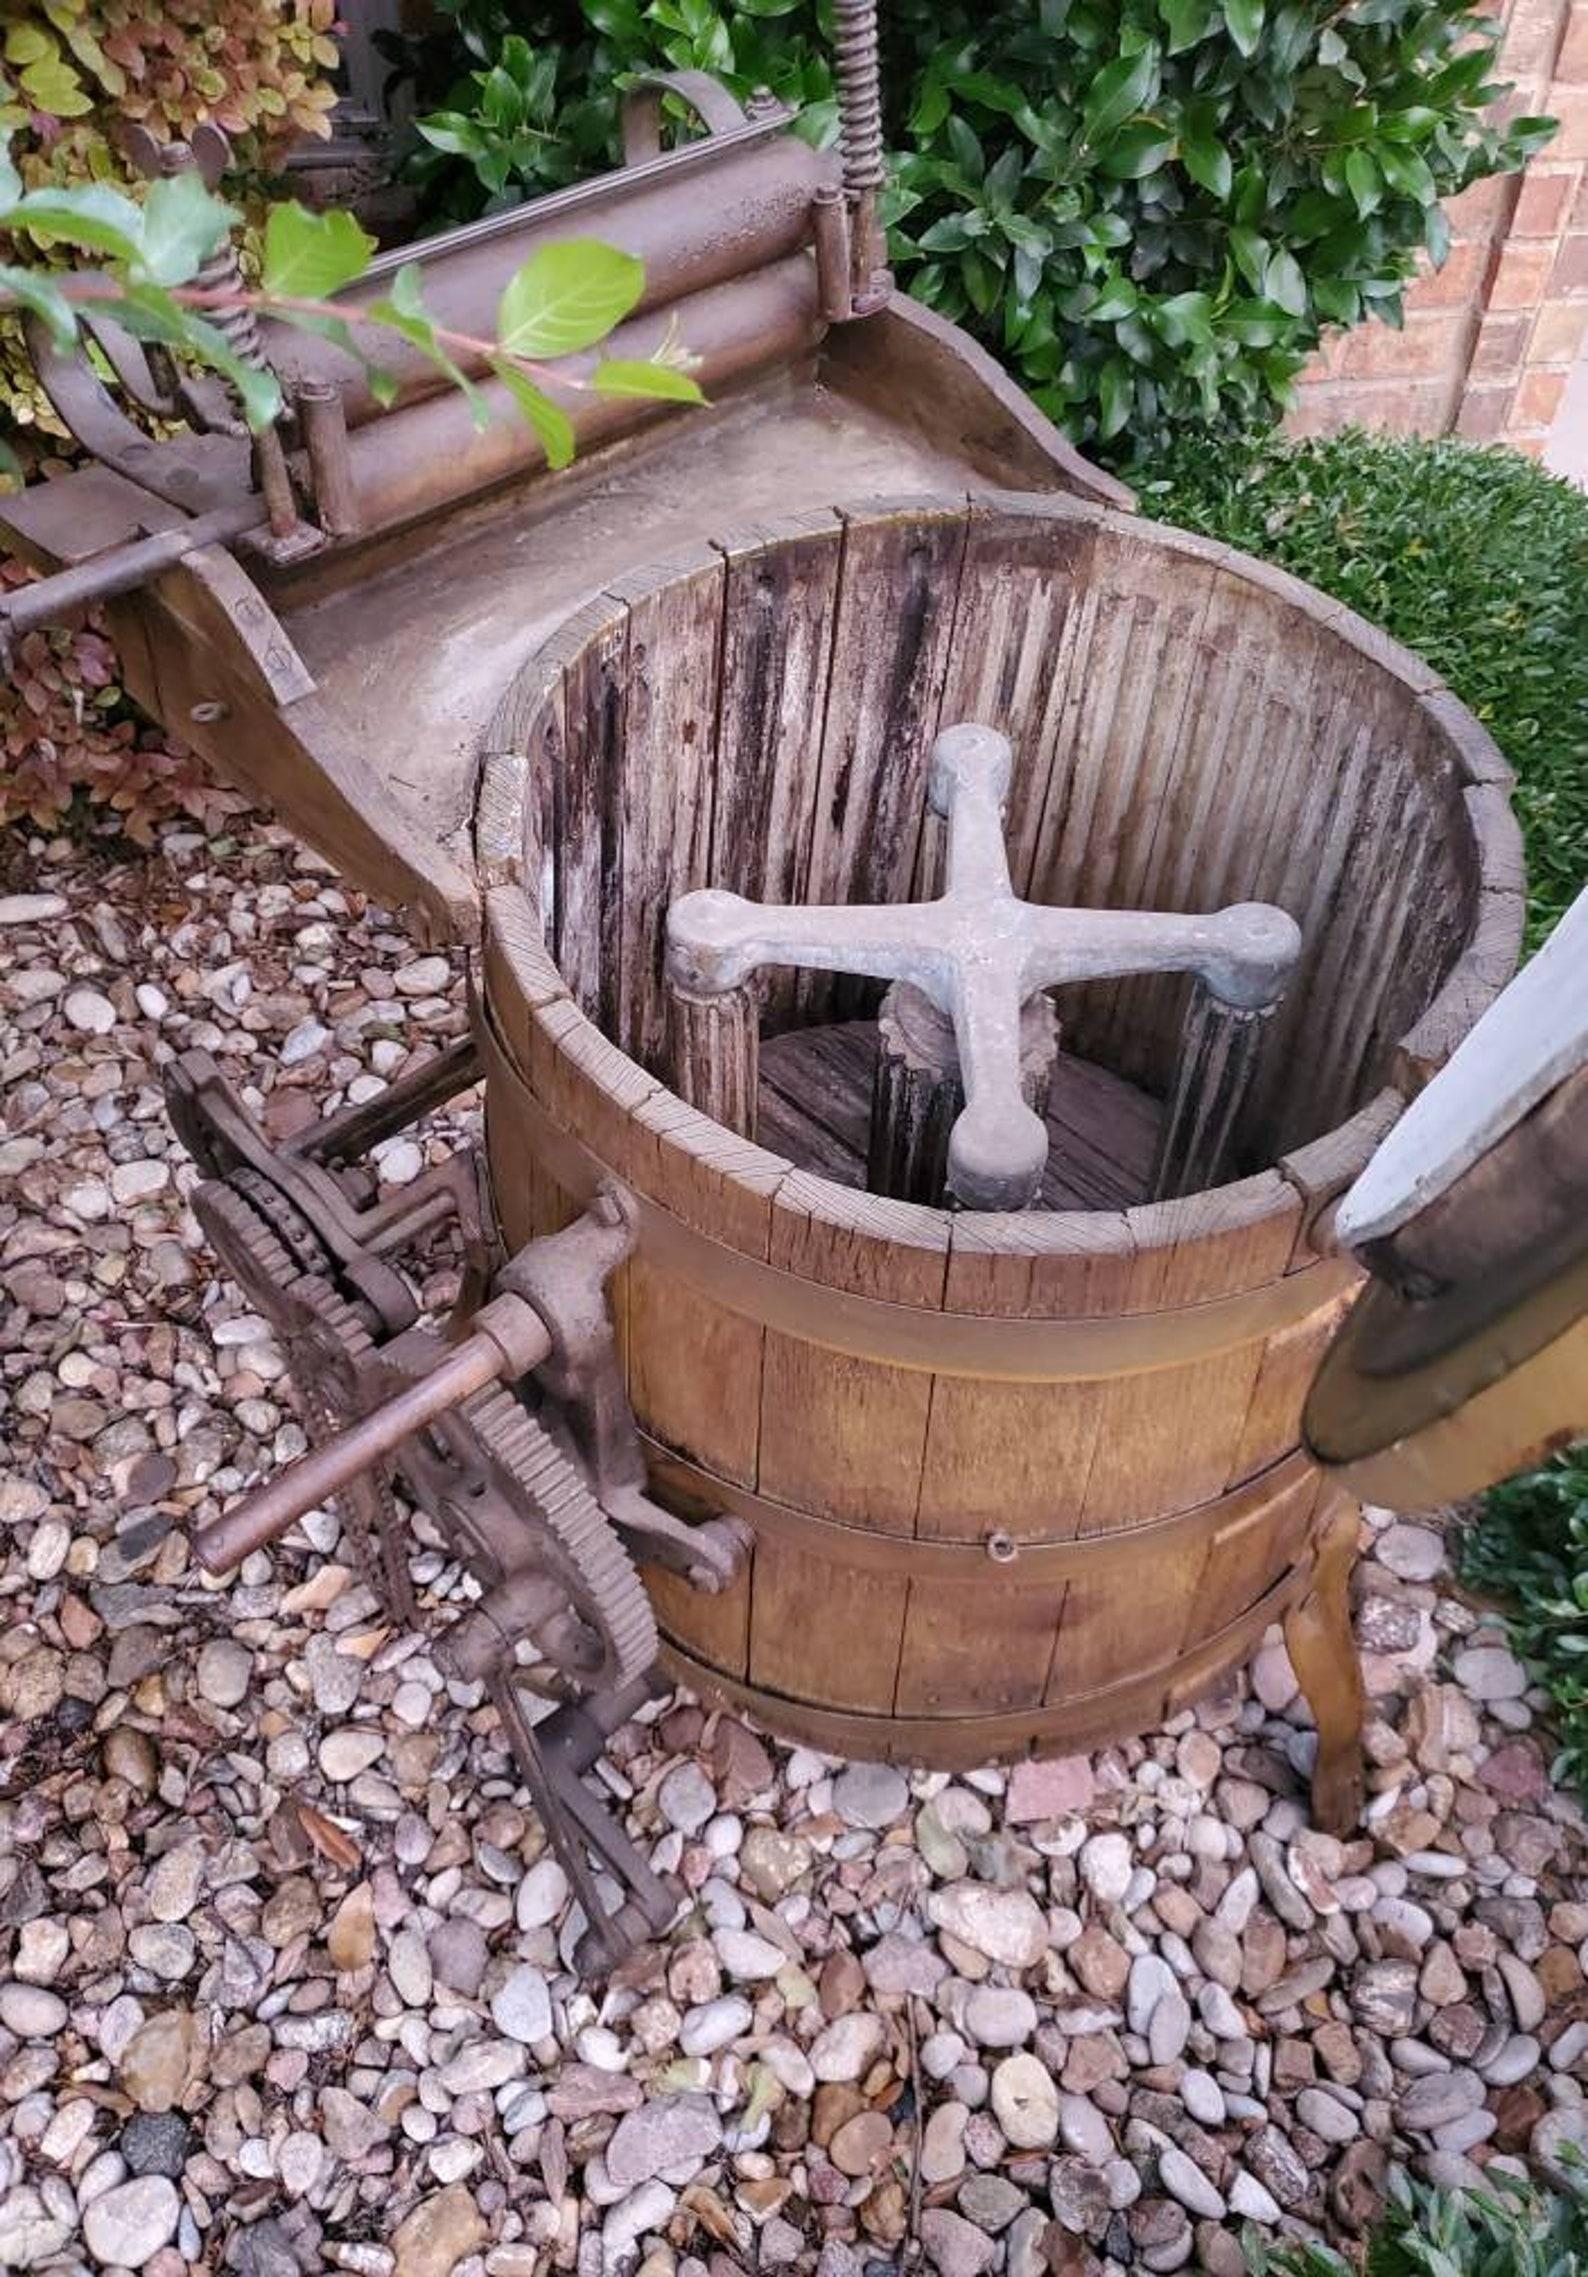 Primitive 19th Century American Early Washing Machine with Mangle